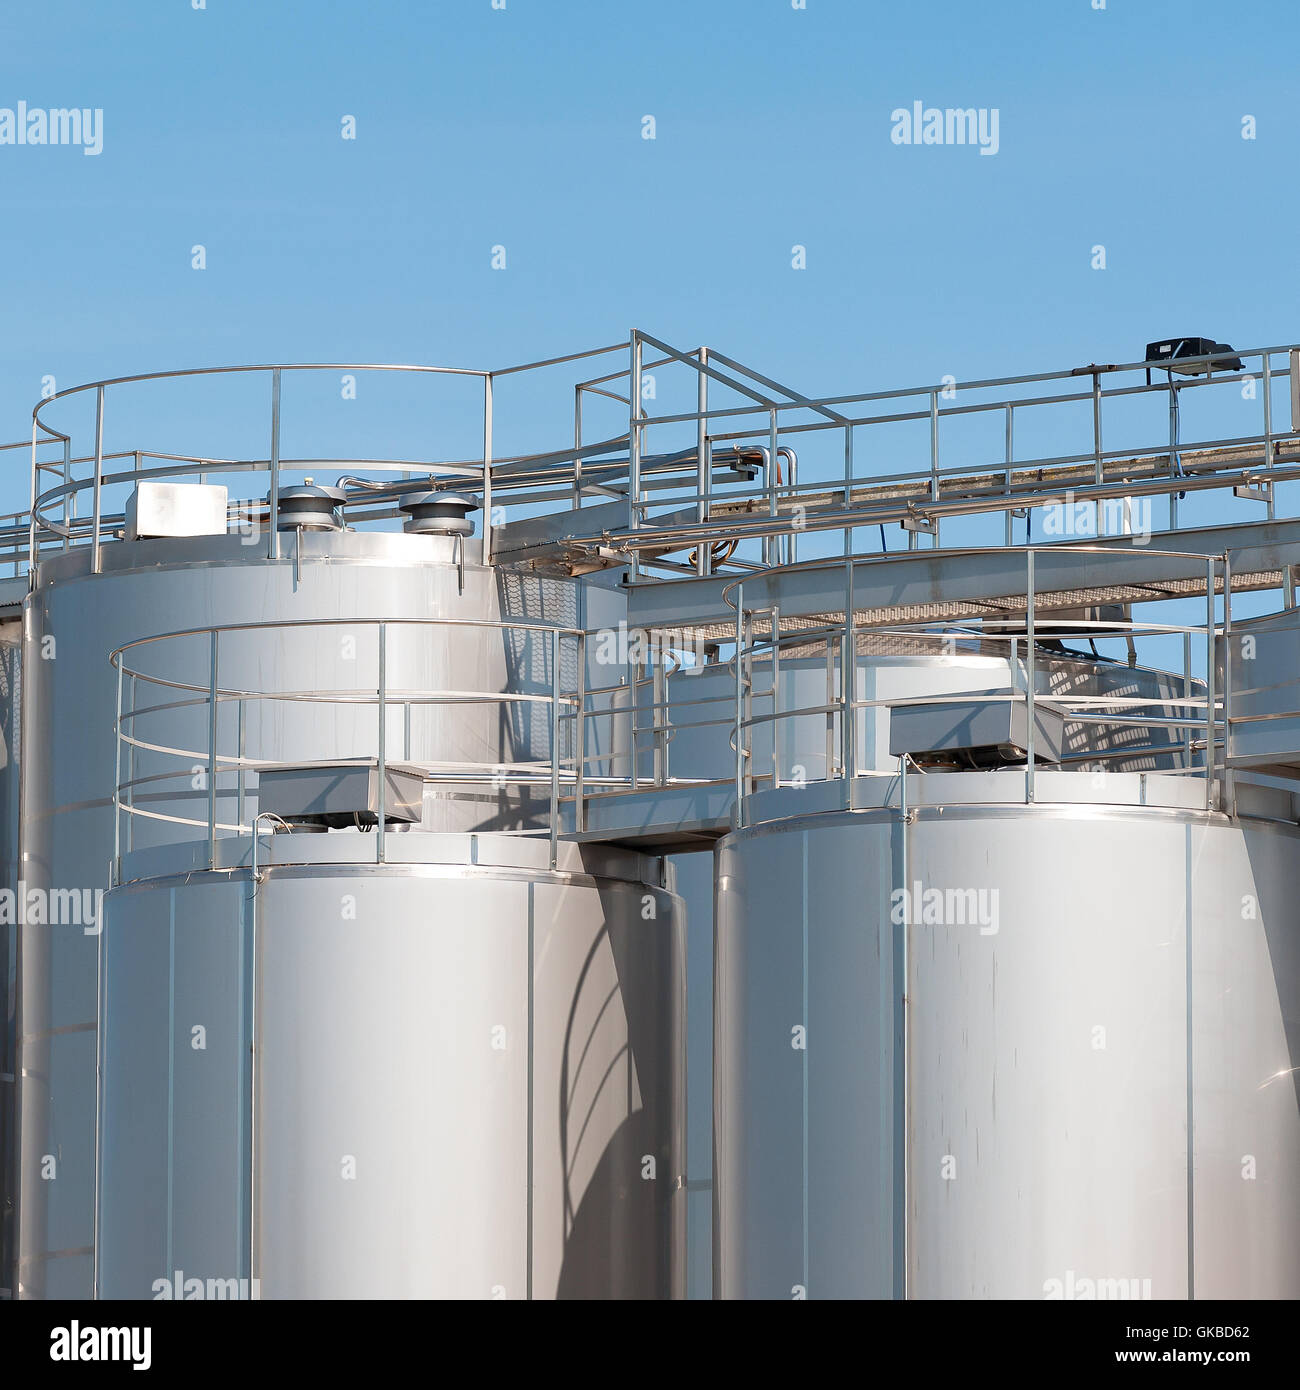 Stainless steel silos . For a milk processing plant. Stock Photo